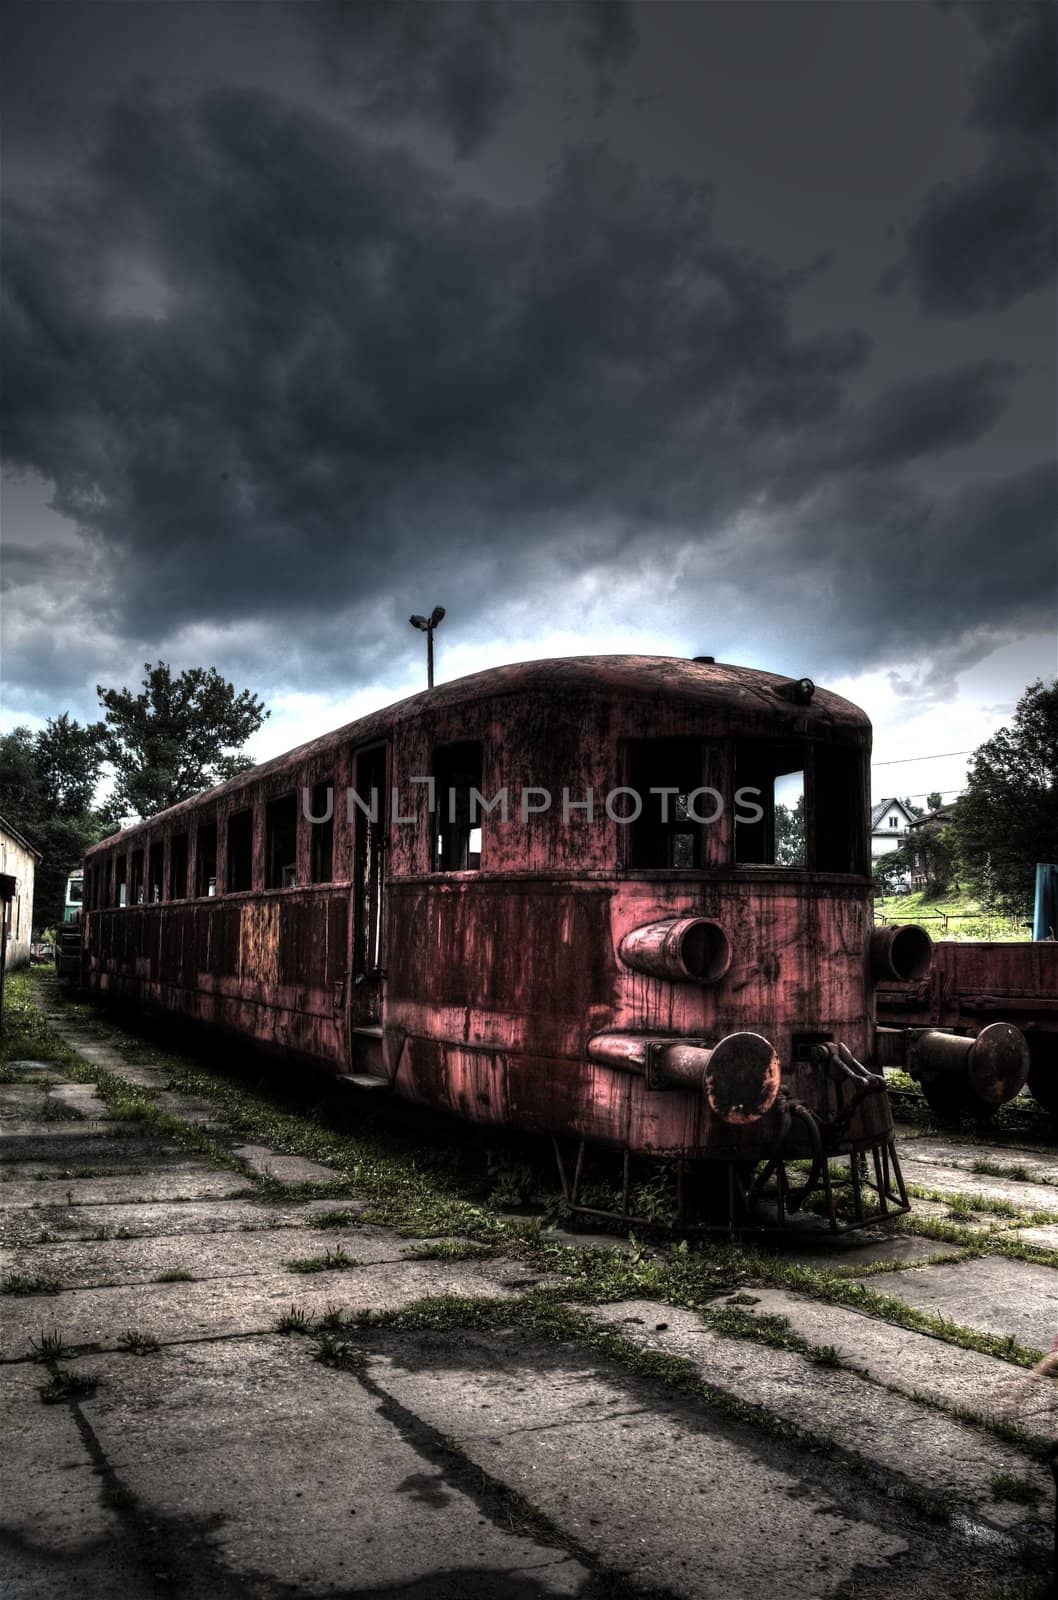 Old rusty and dirty train on background with sky covered by stormy clouds.